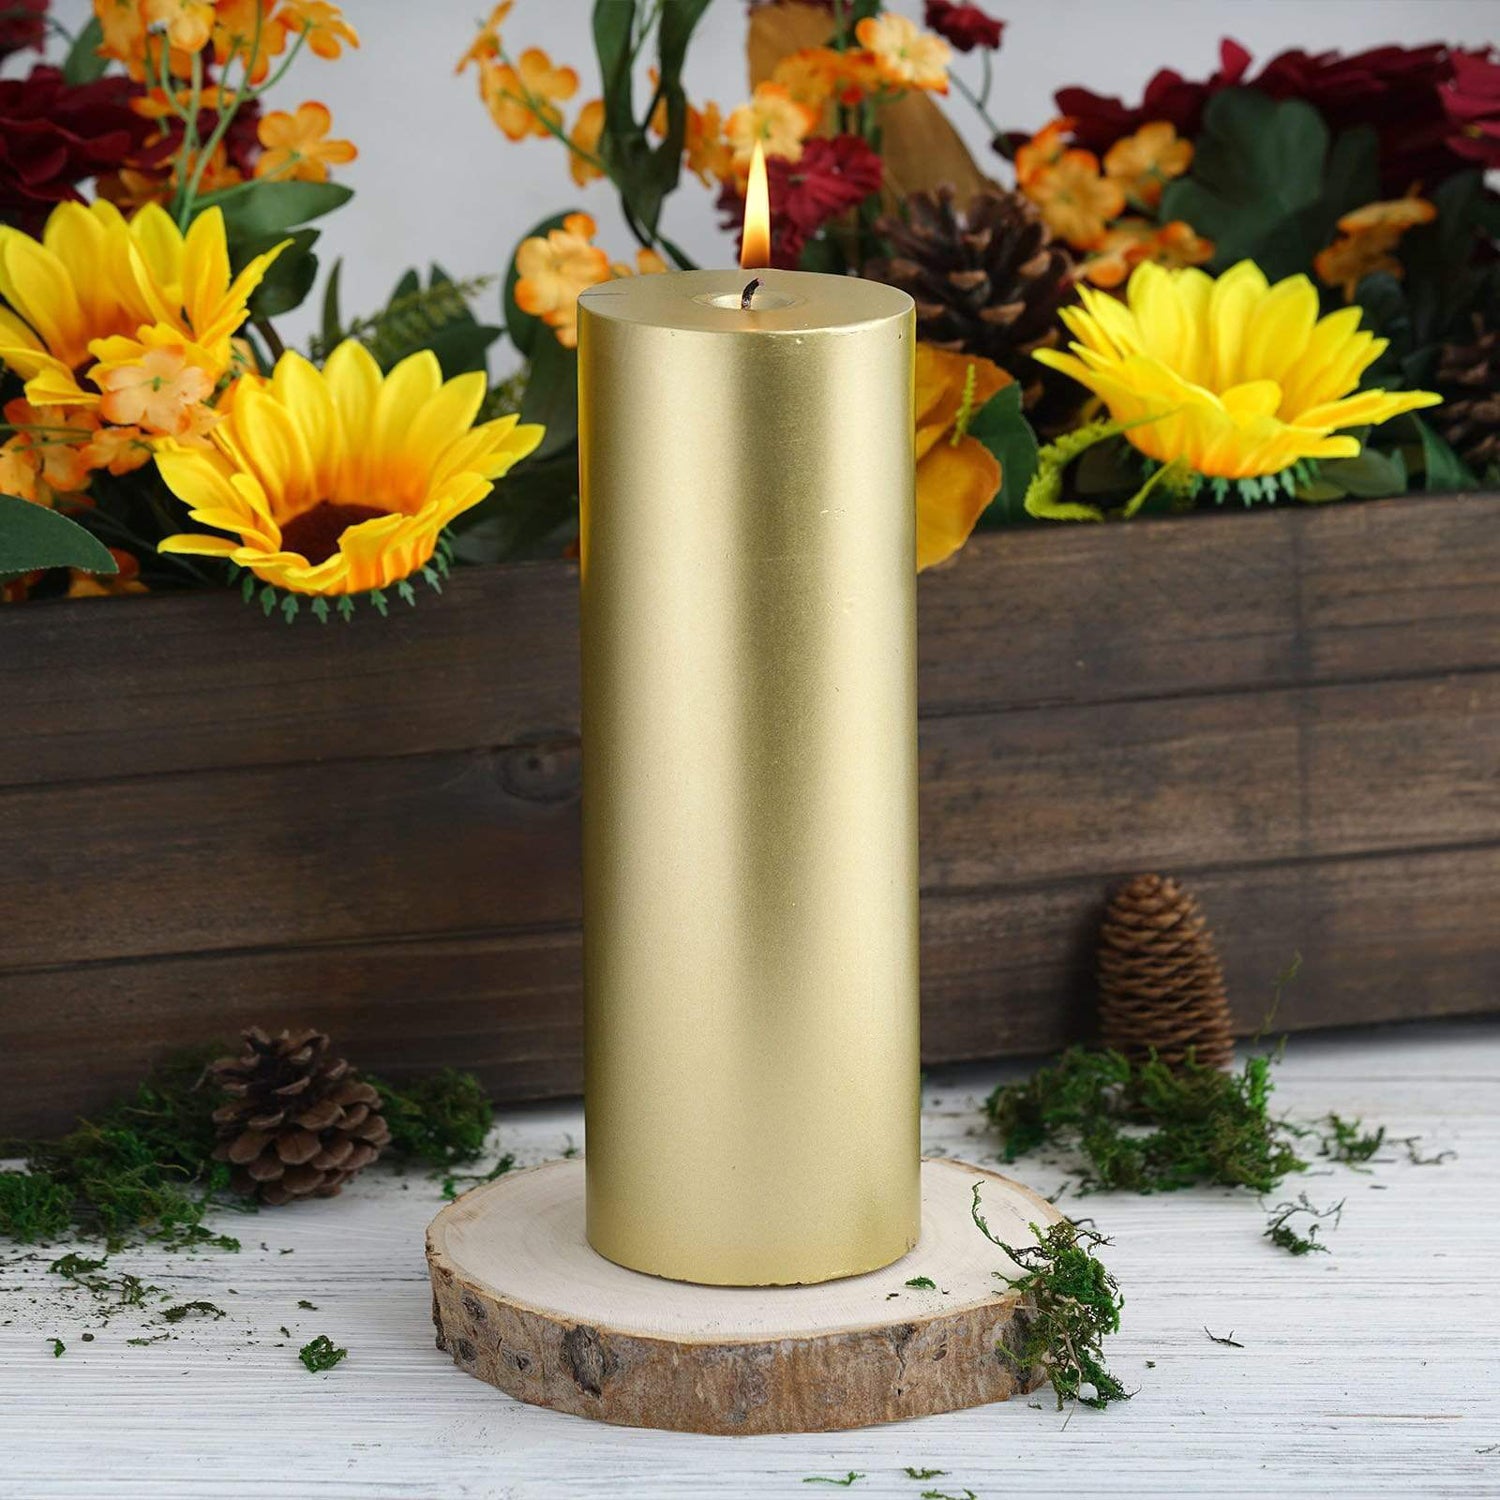 Golden round soy wax pillar candle -Cinnamon scent